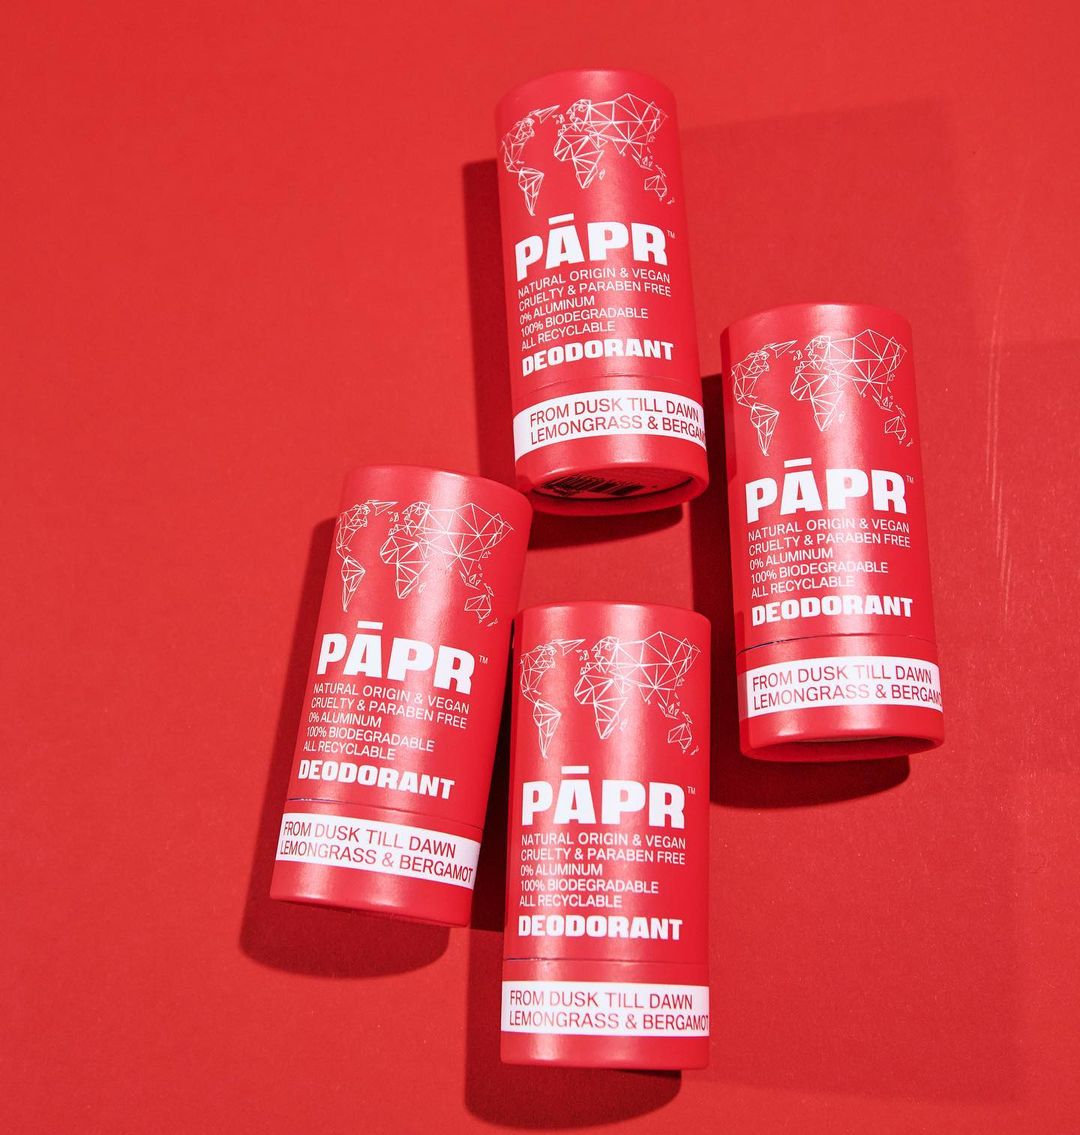 PAPR deodorant on red background